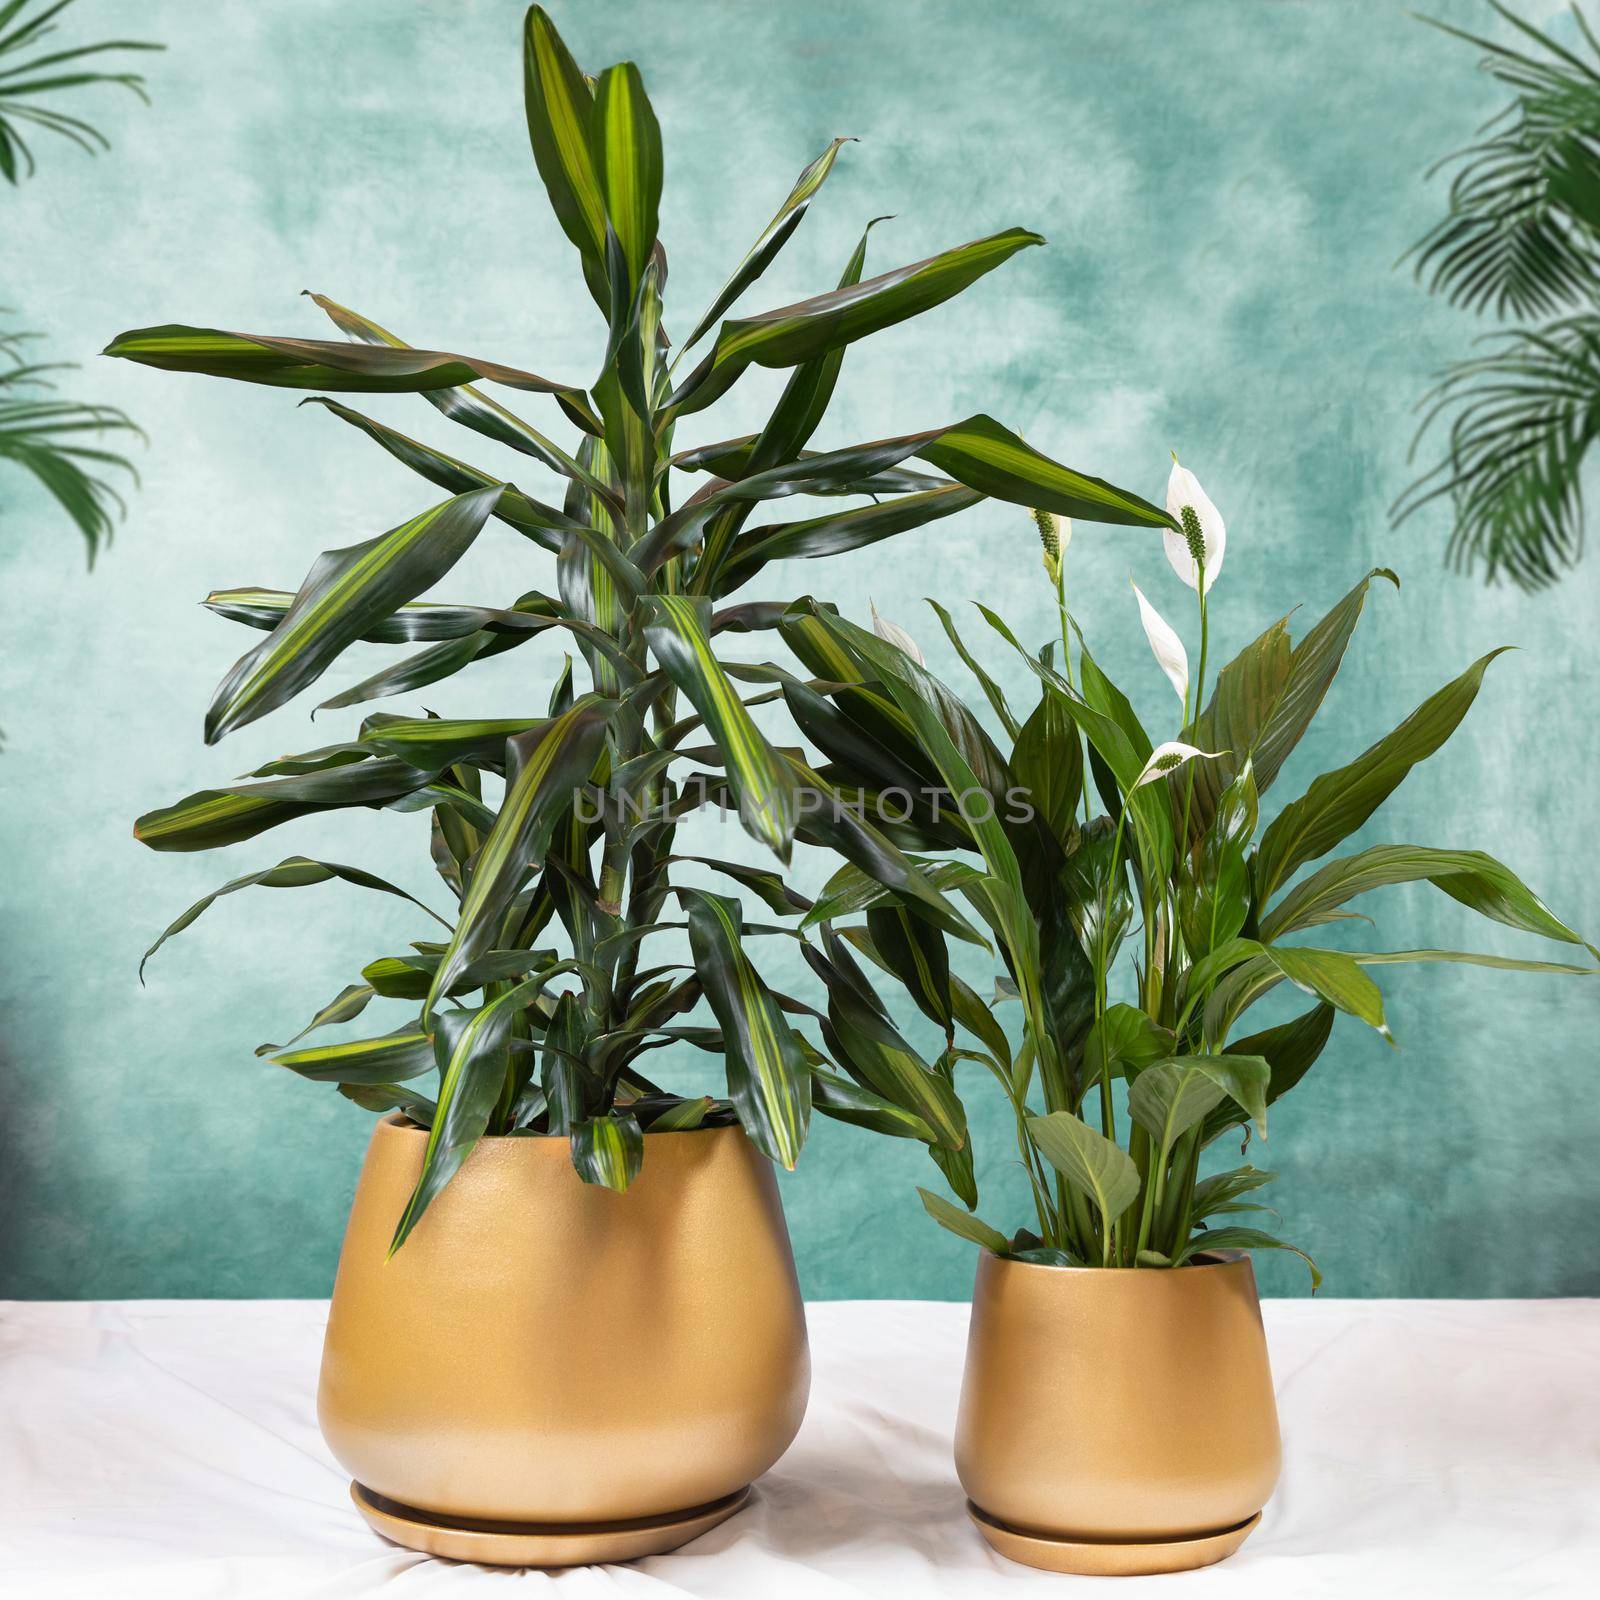 Dracaena fragrans Cintho and Peace Lily plant in a golden pot